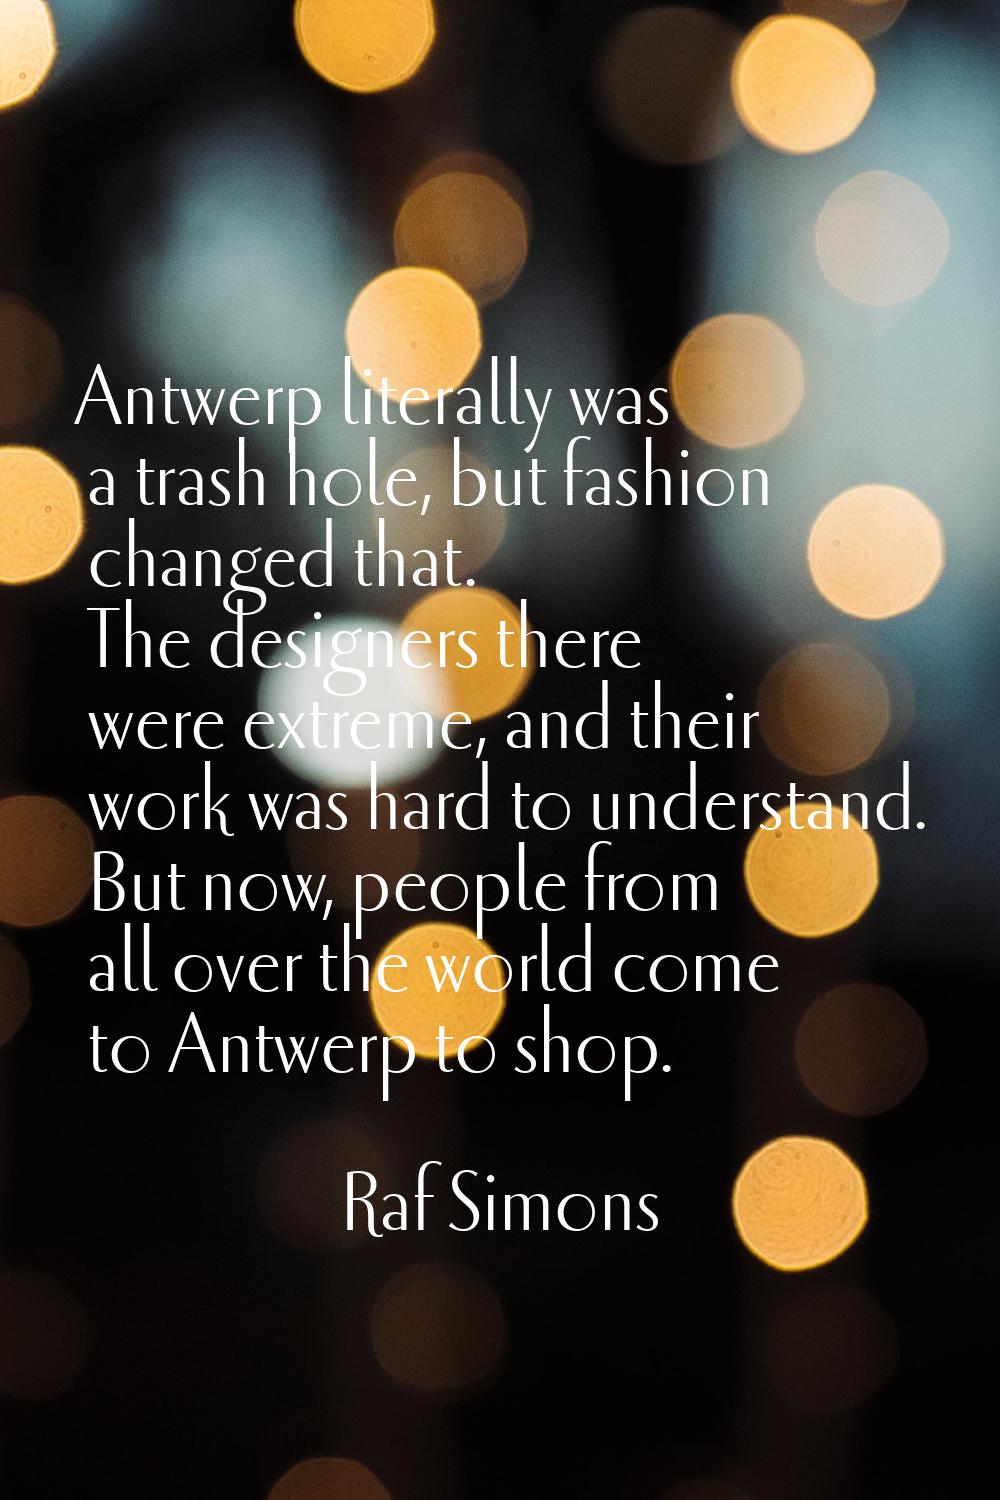 Antwerp literally was a trash hole, but fashion changed that. The designers there were extreme, and